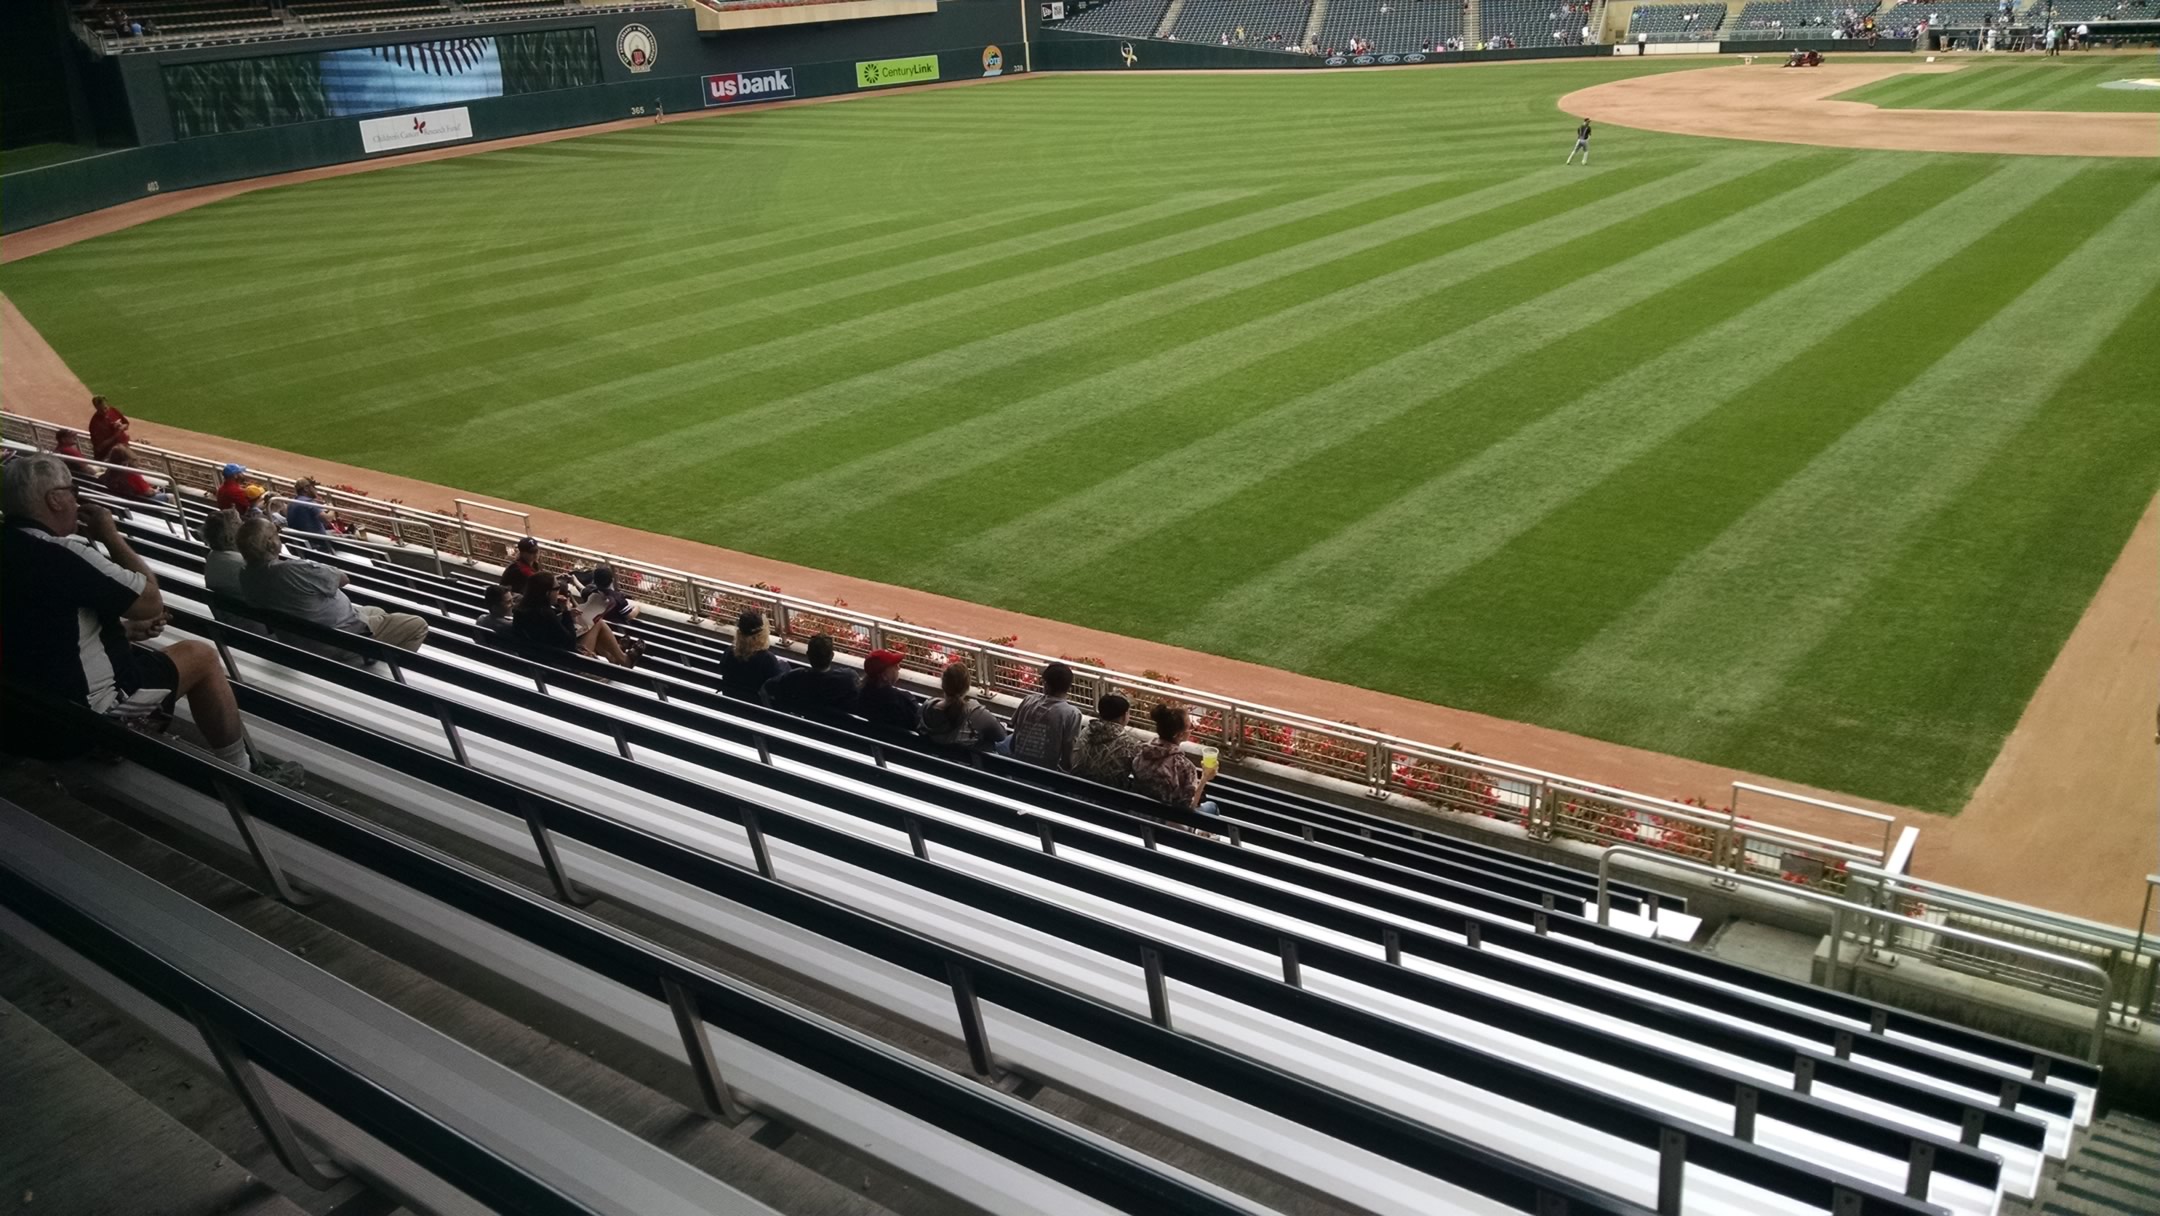 Minnesota Twins' Target Field from the second deck behind home